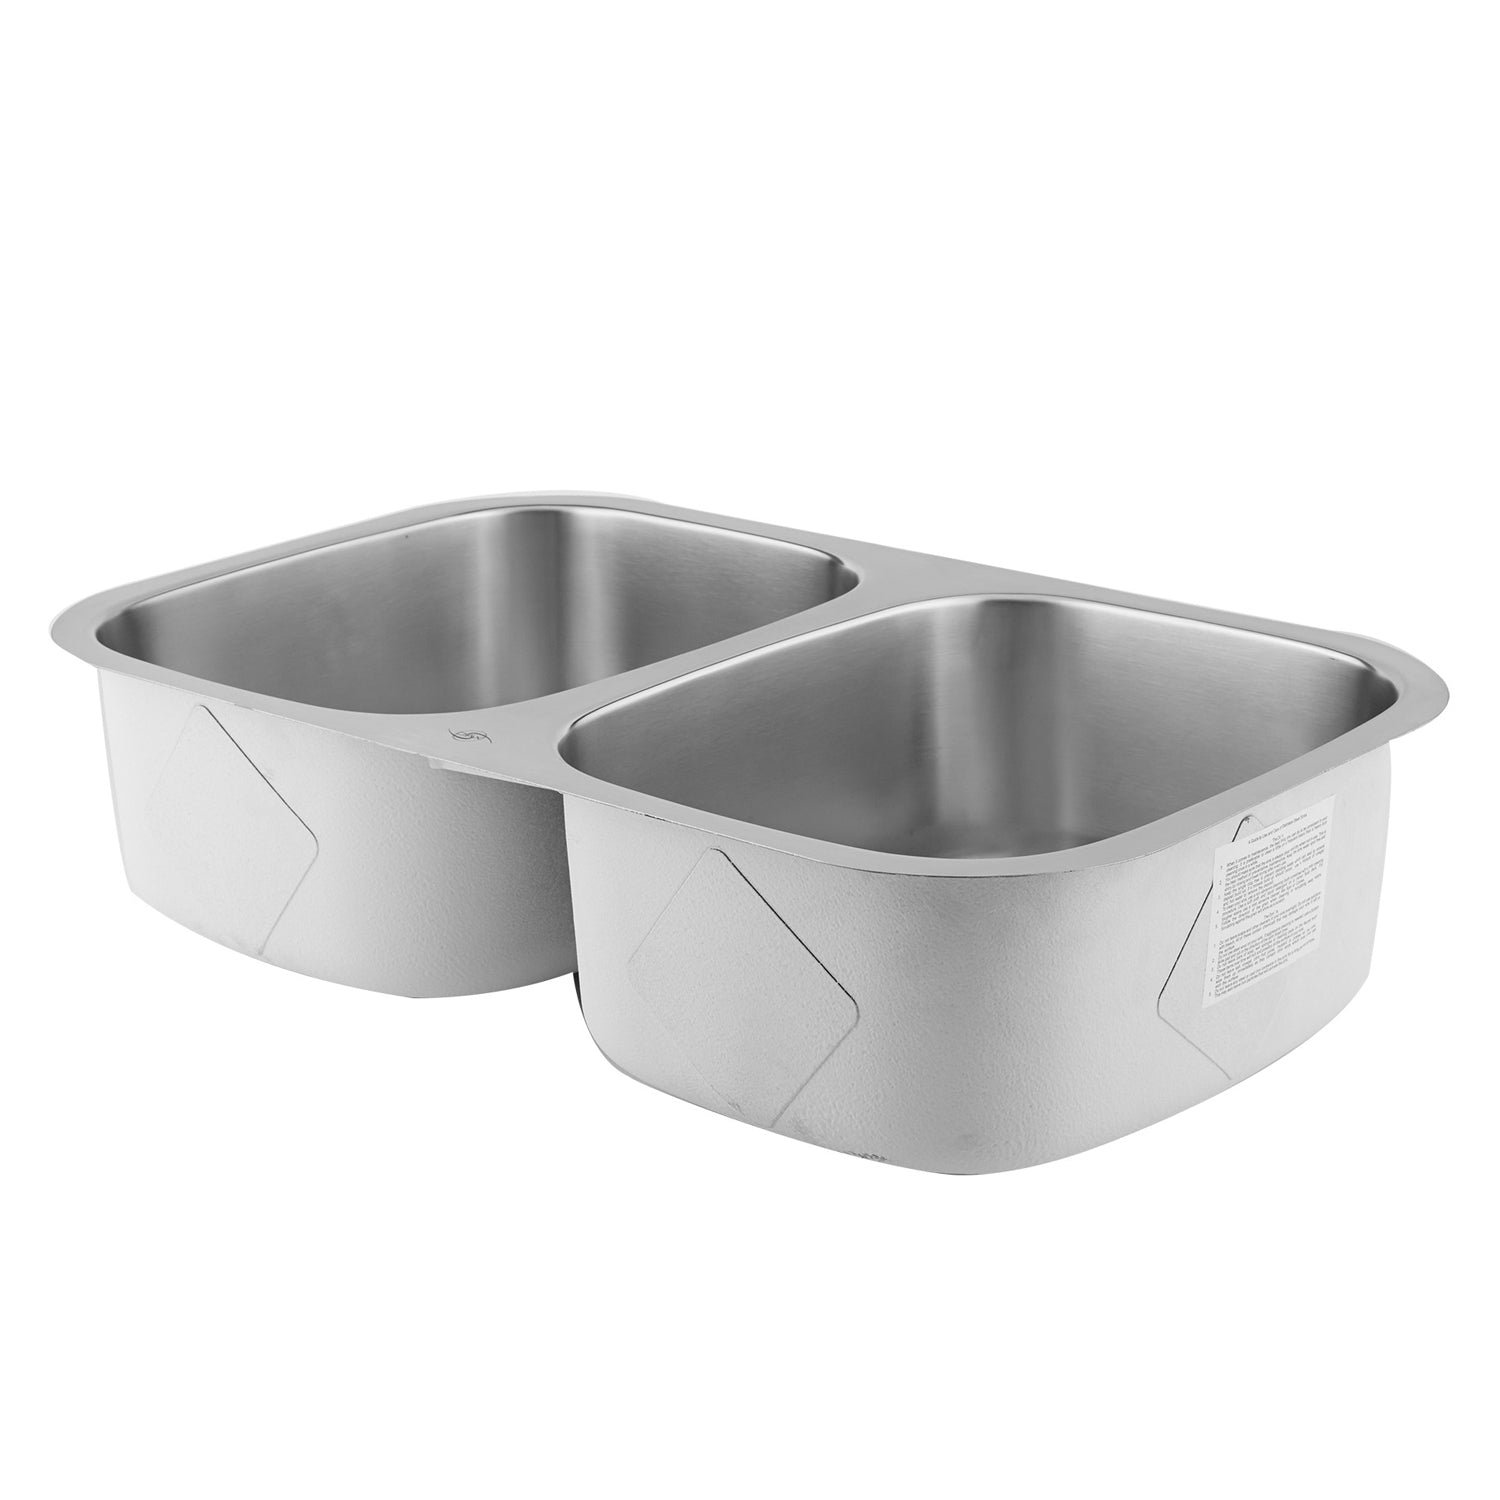 DAX 50/50 Double Bowl Undermount Kitchen Sink, 18 Gauge Stainless Steel, Brushed Finish , 29-1/8 x 18-1/2 x 8 Inches (DAX-2918)